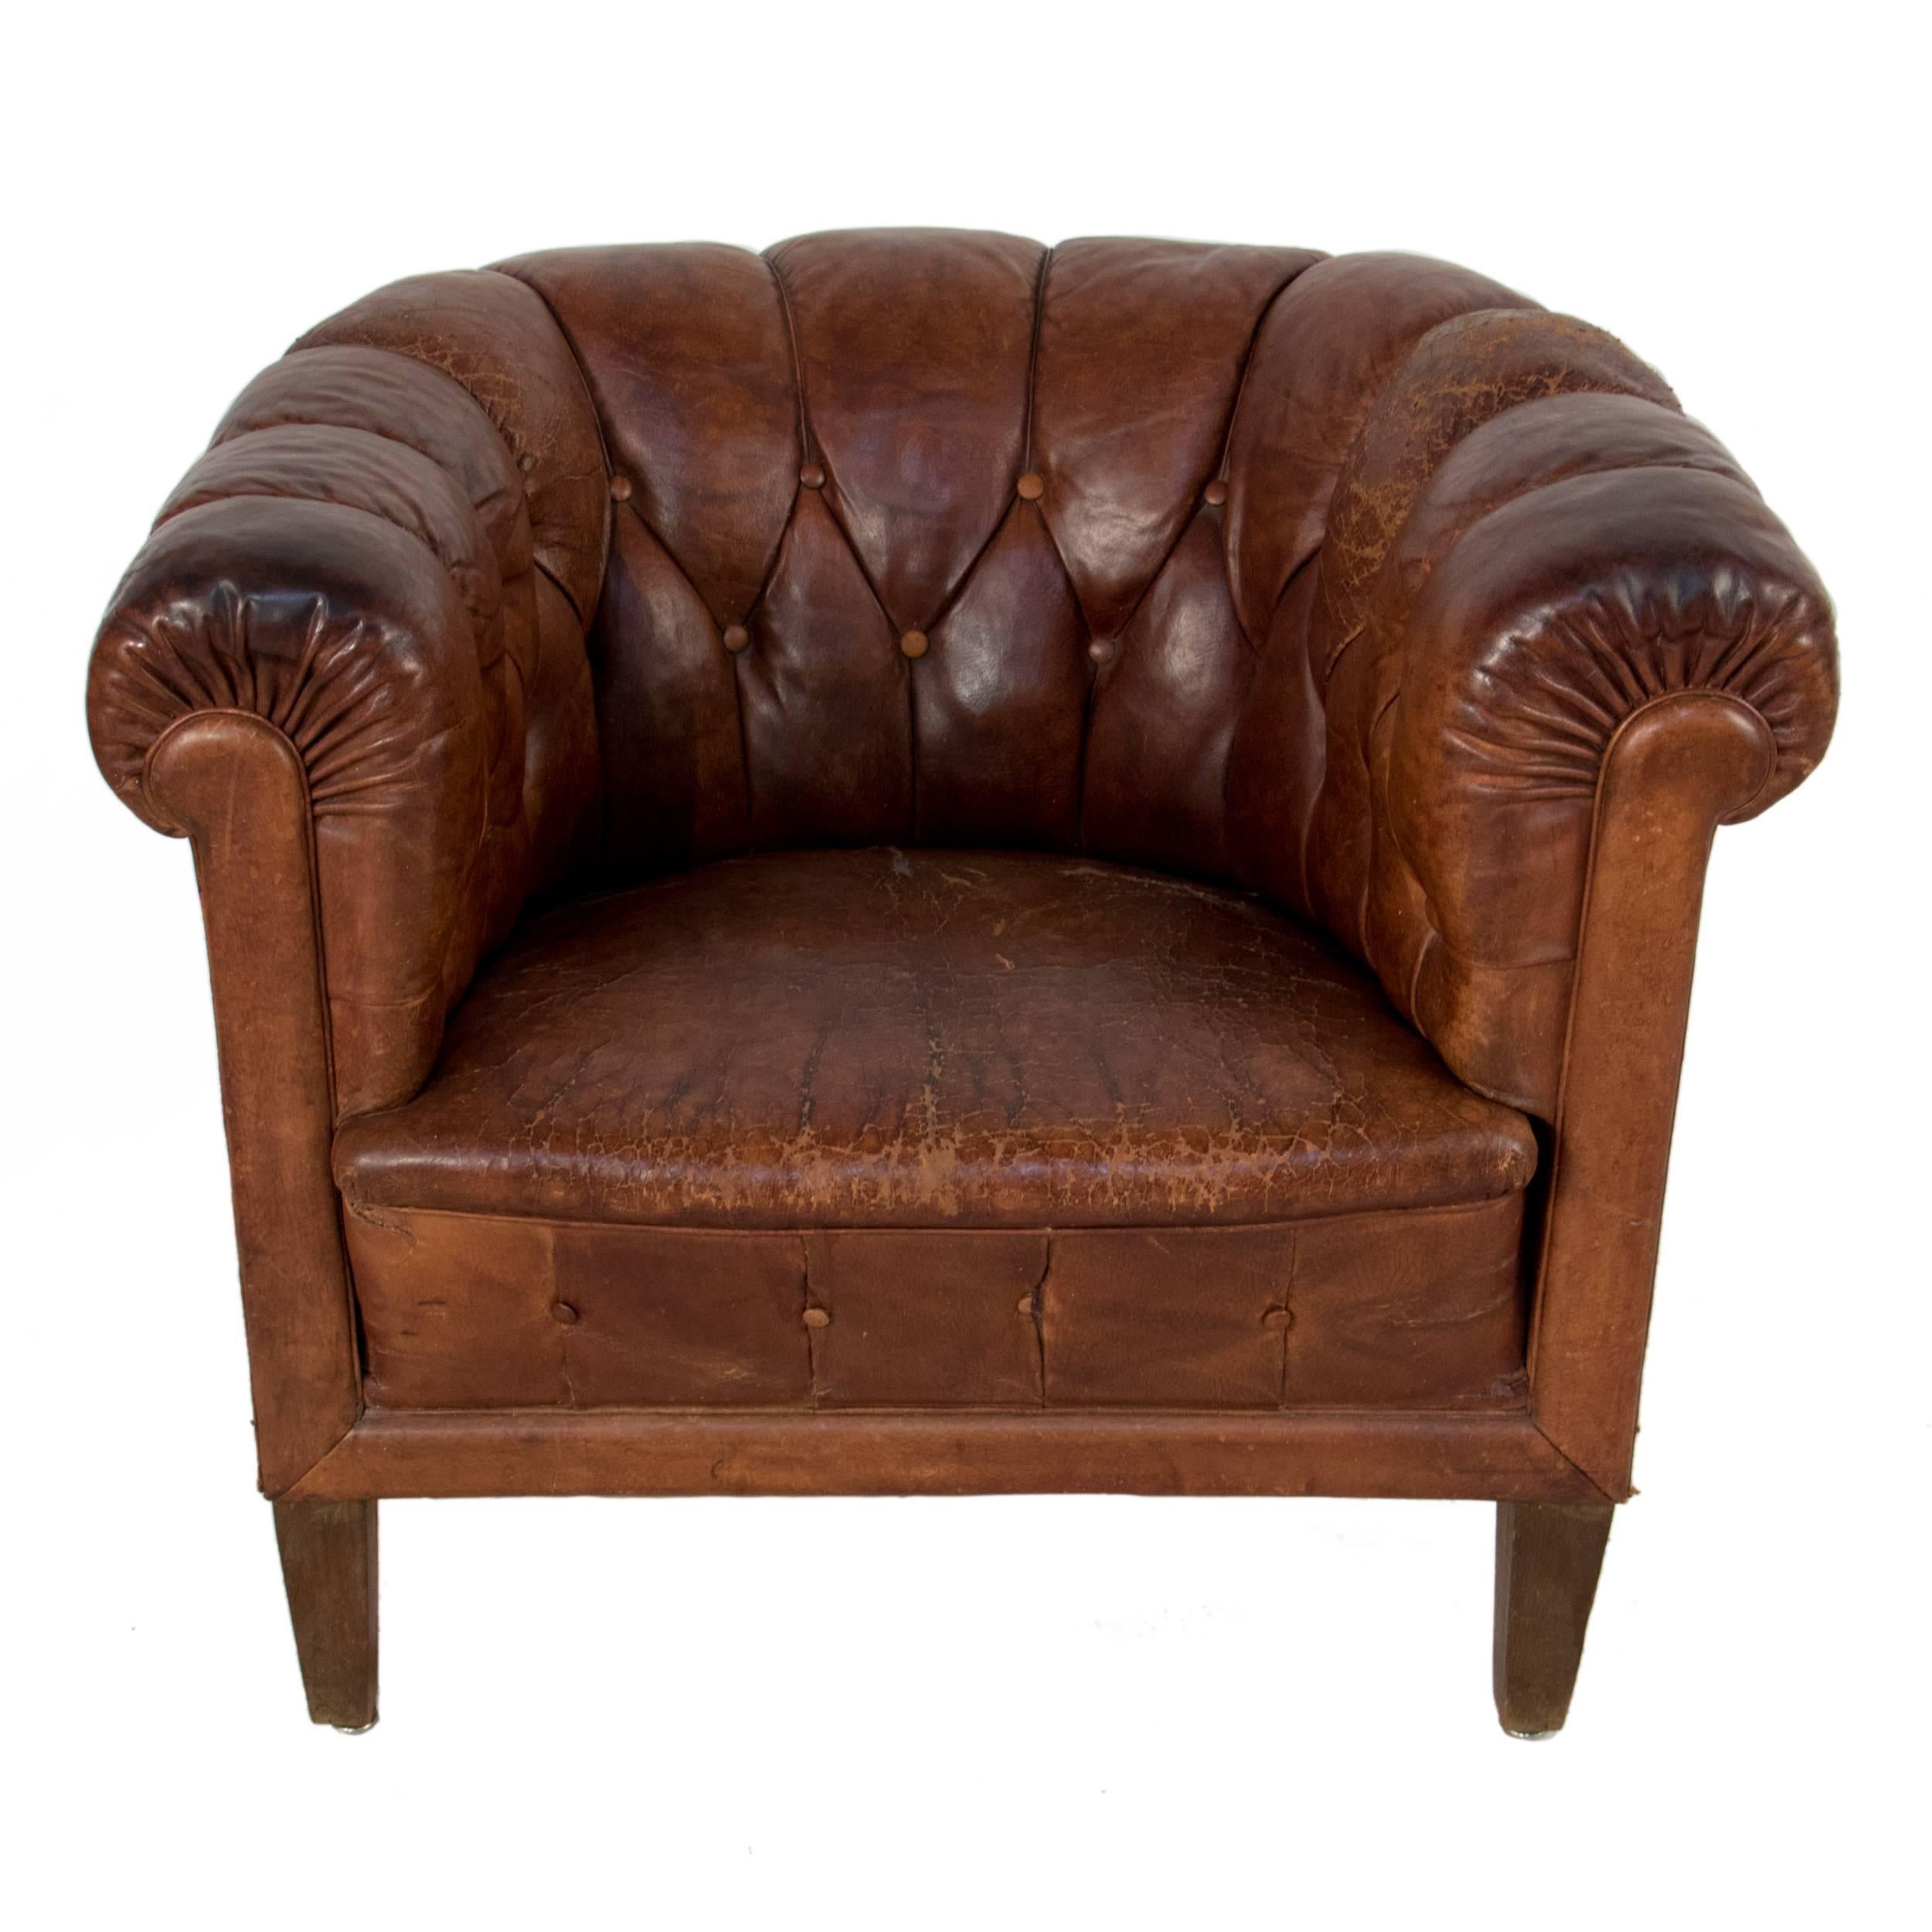 Tufted leather chesterfield club chair.